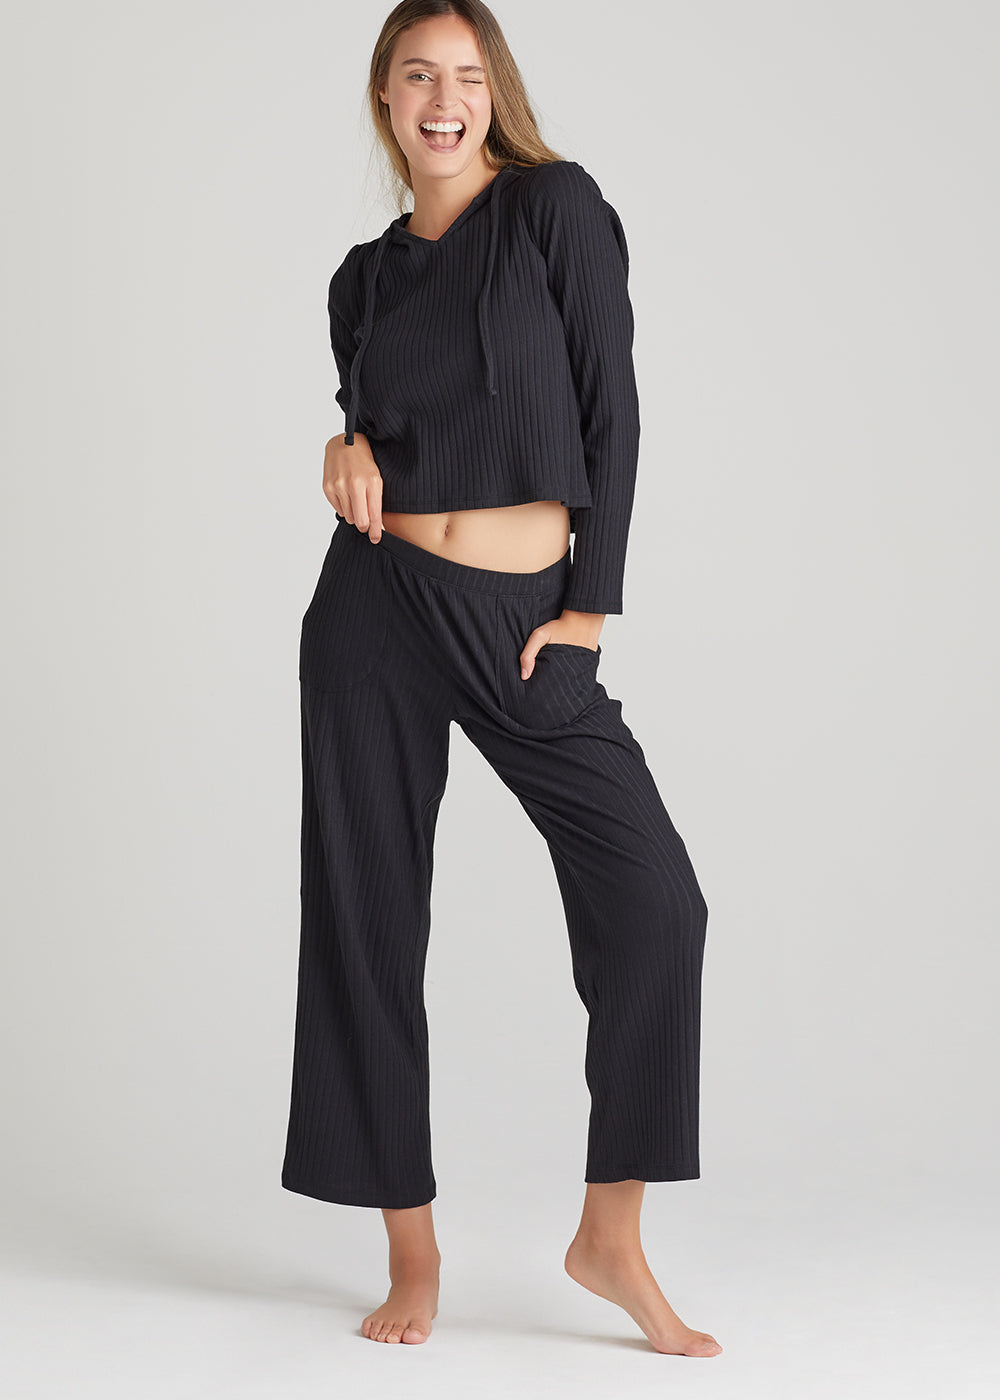 cropped lounge pant - cotton rib and cropped lounge hoodie - cotton rib in Black worn by a woman standing facing forward with right hand on hip and left hand in pocket Yummie